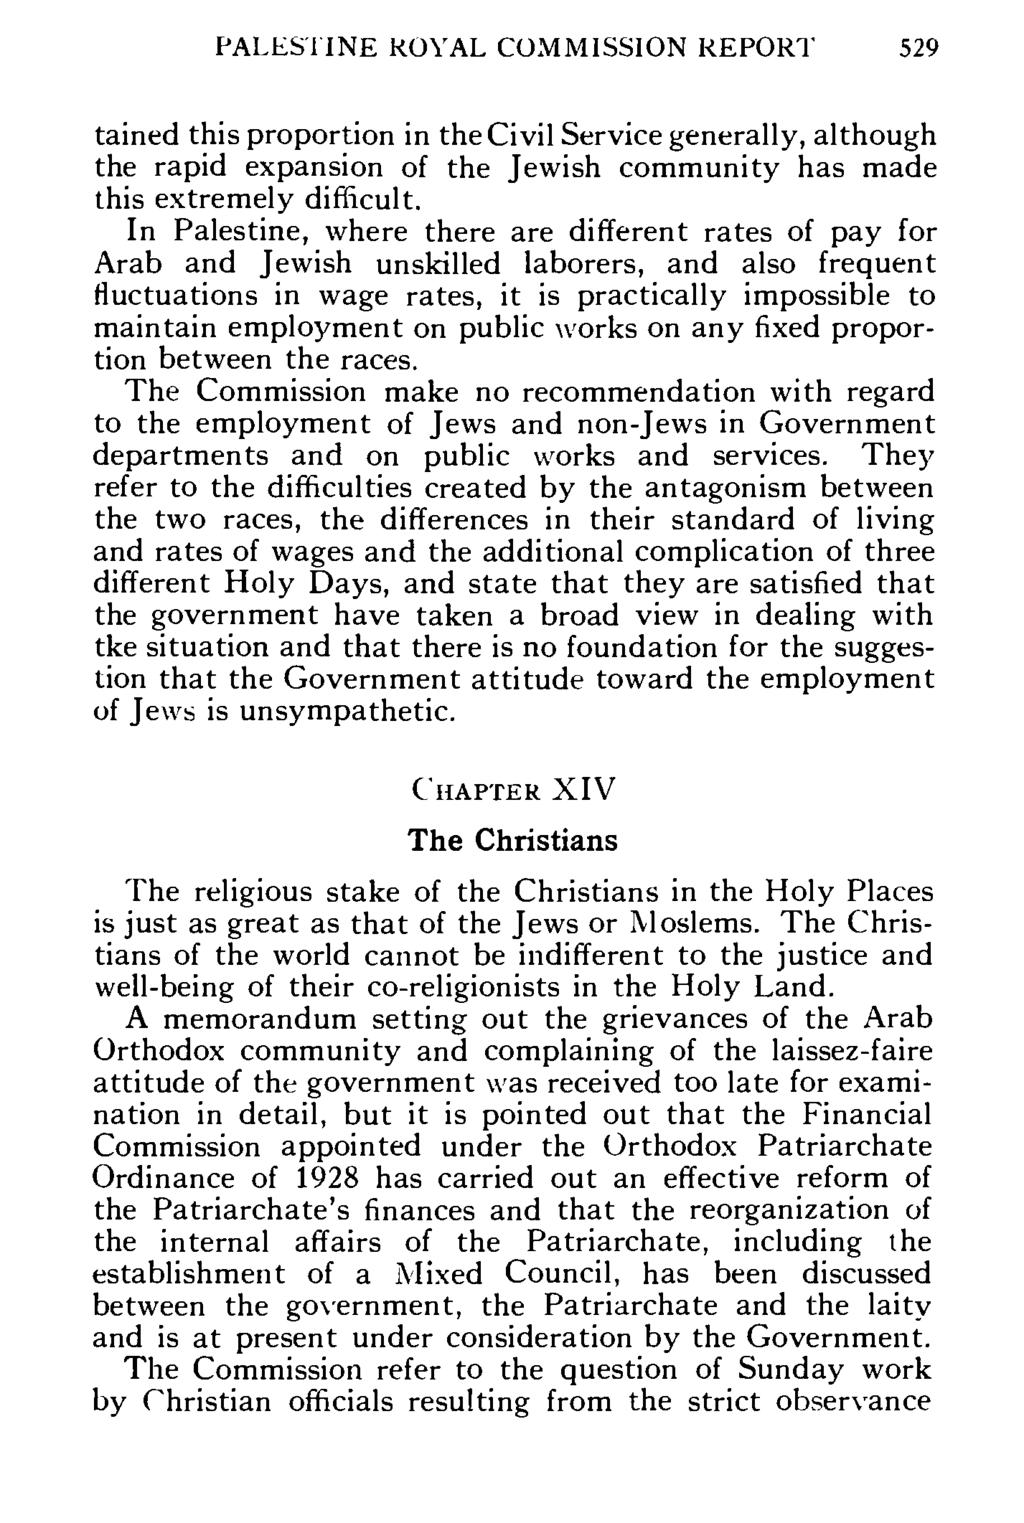 PALESTINE KOVAL COMMISSION REPORT 529 tained this proportion in the Civil Service generally, although the rapid expansion of the Jewish community has made this extremely difficult.